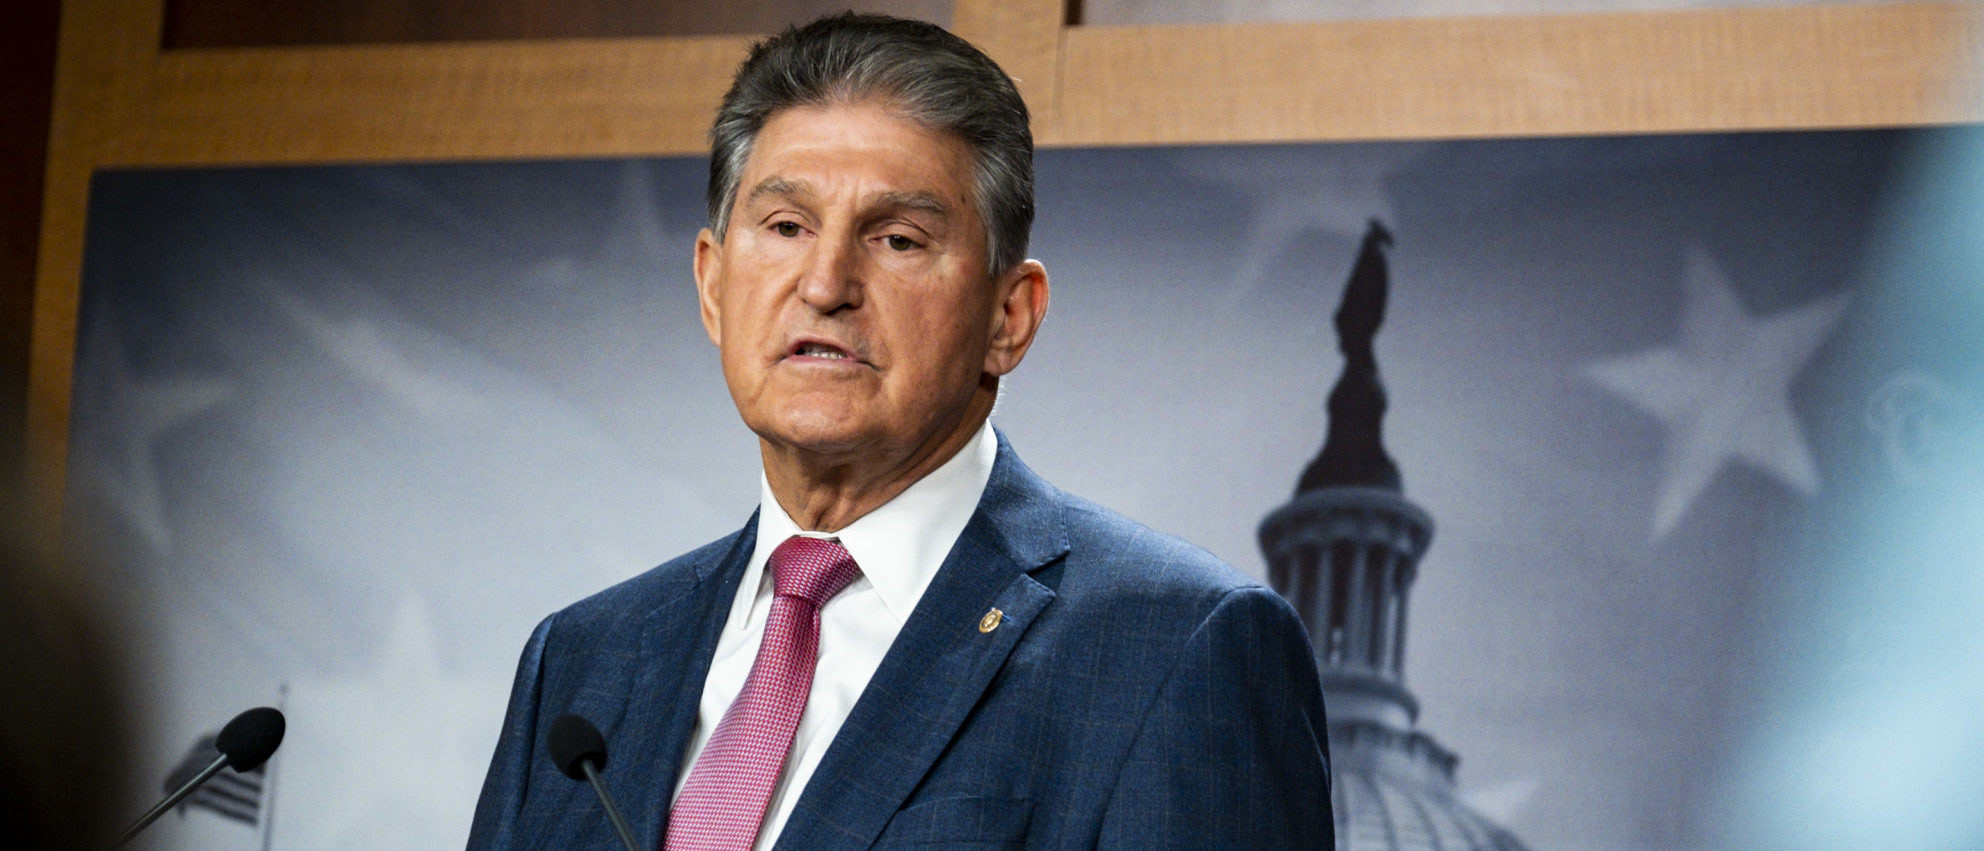 KOLB: Joe Manchin Could Broker A ‘Build Back Better’ Bipartisan Compromise On One Vital Issue